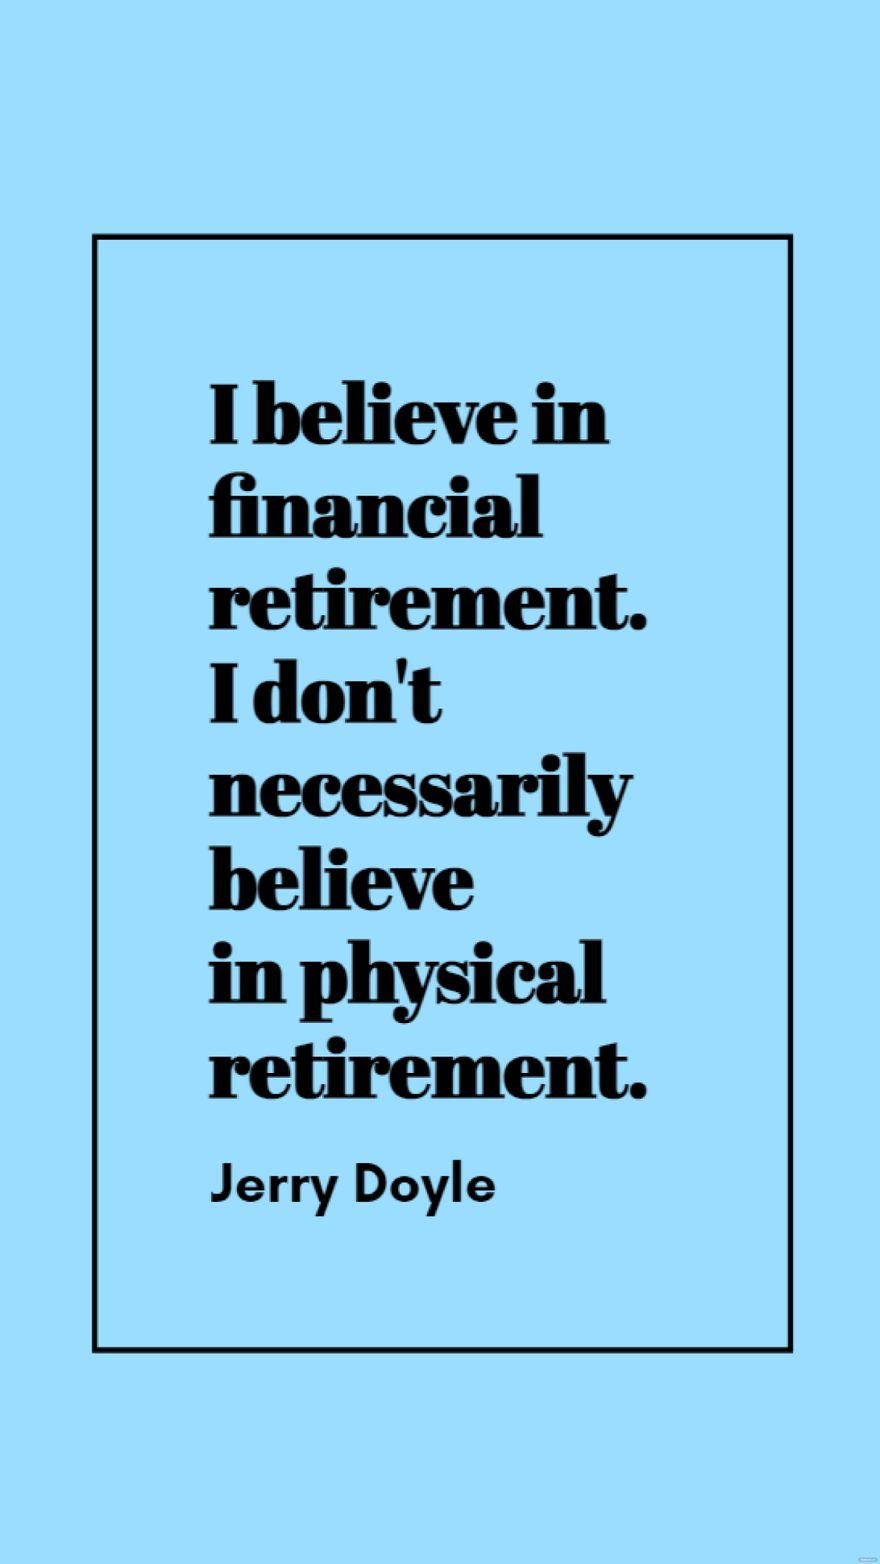 Free Jerry Doyle - I believe in financial retirement. I don't necessarily believe in physical retirement. in JPG